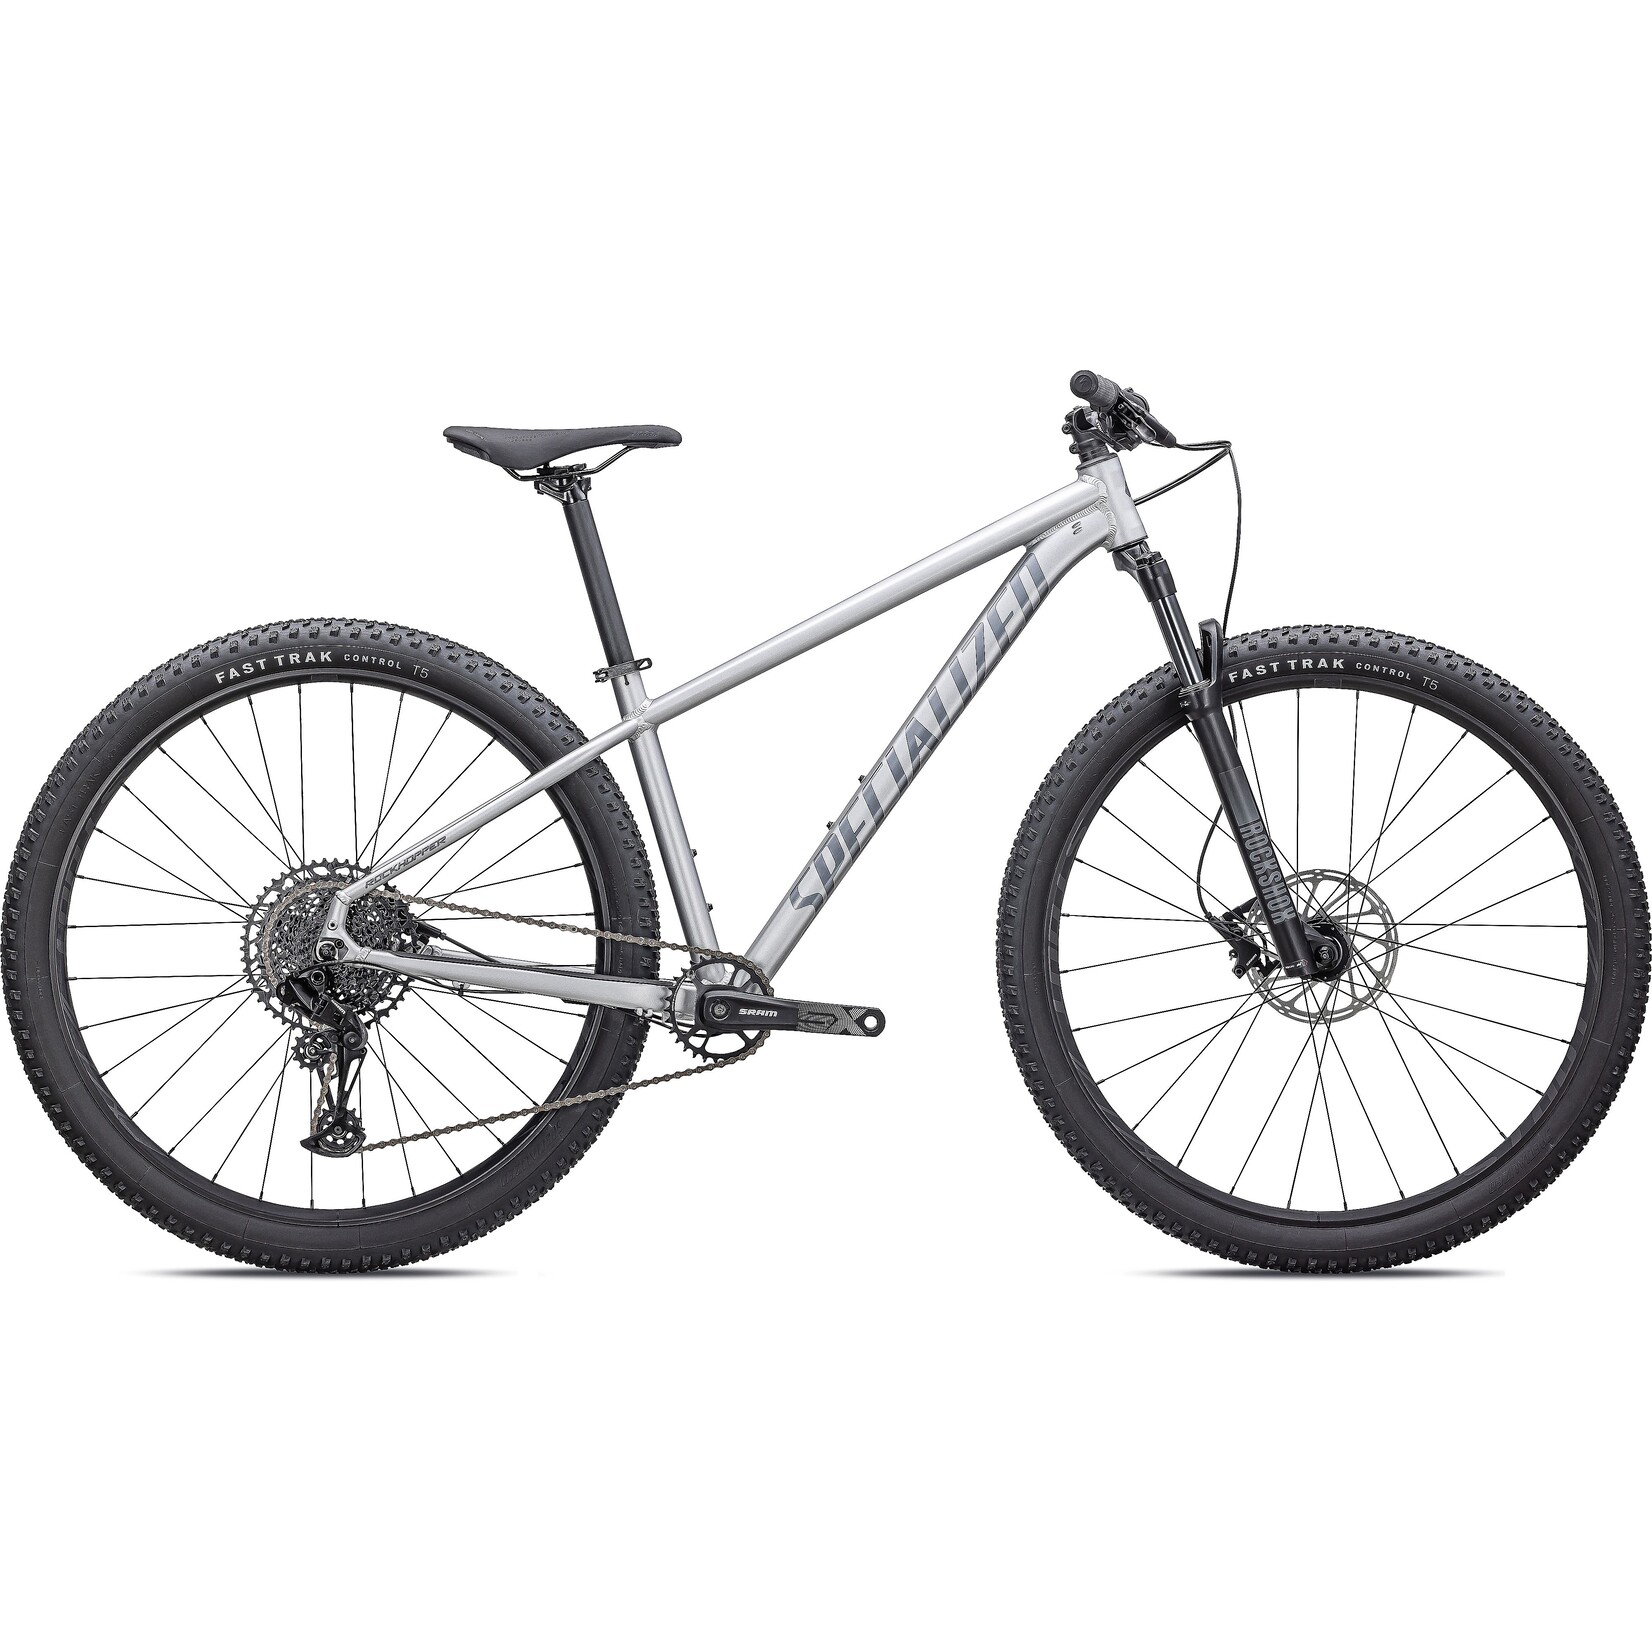 Specialized Rockhopper Expert 29 in SATIN SILVER DUST / BLACK HOLOGRAPHIC